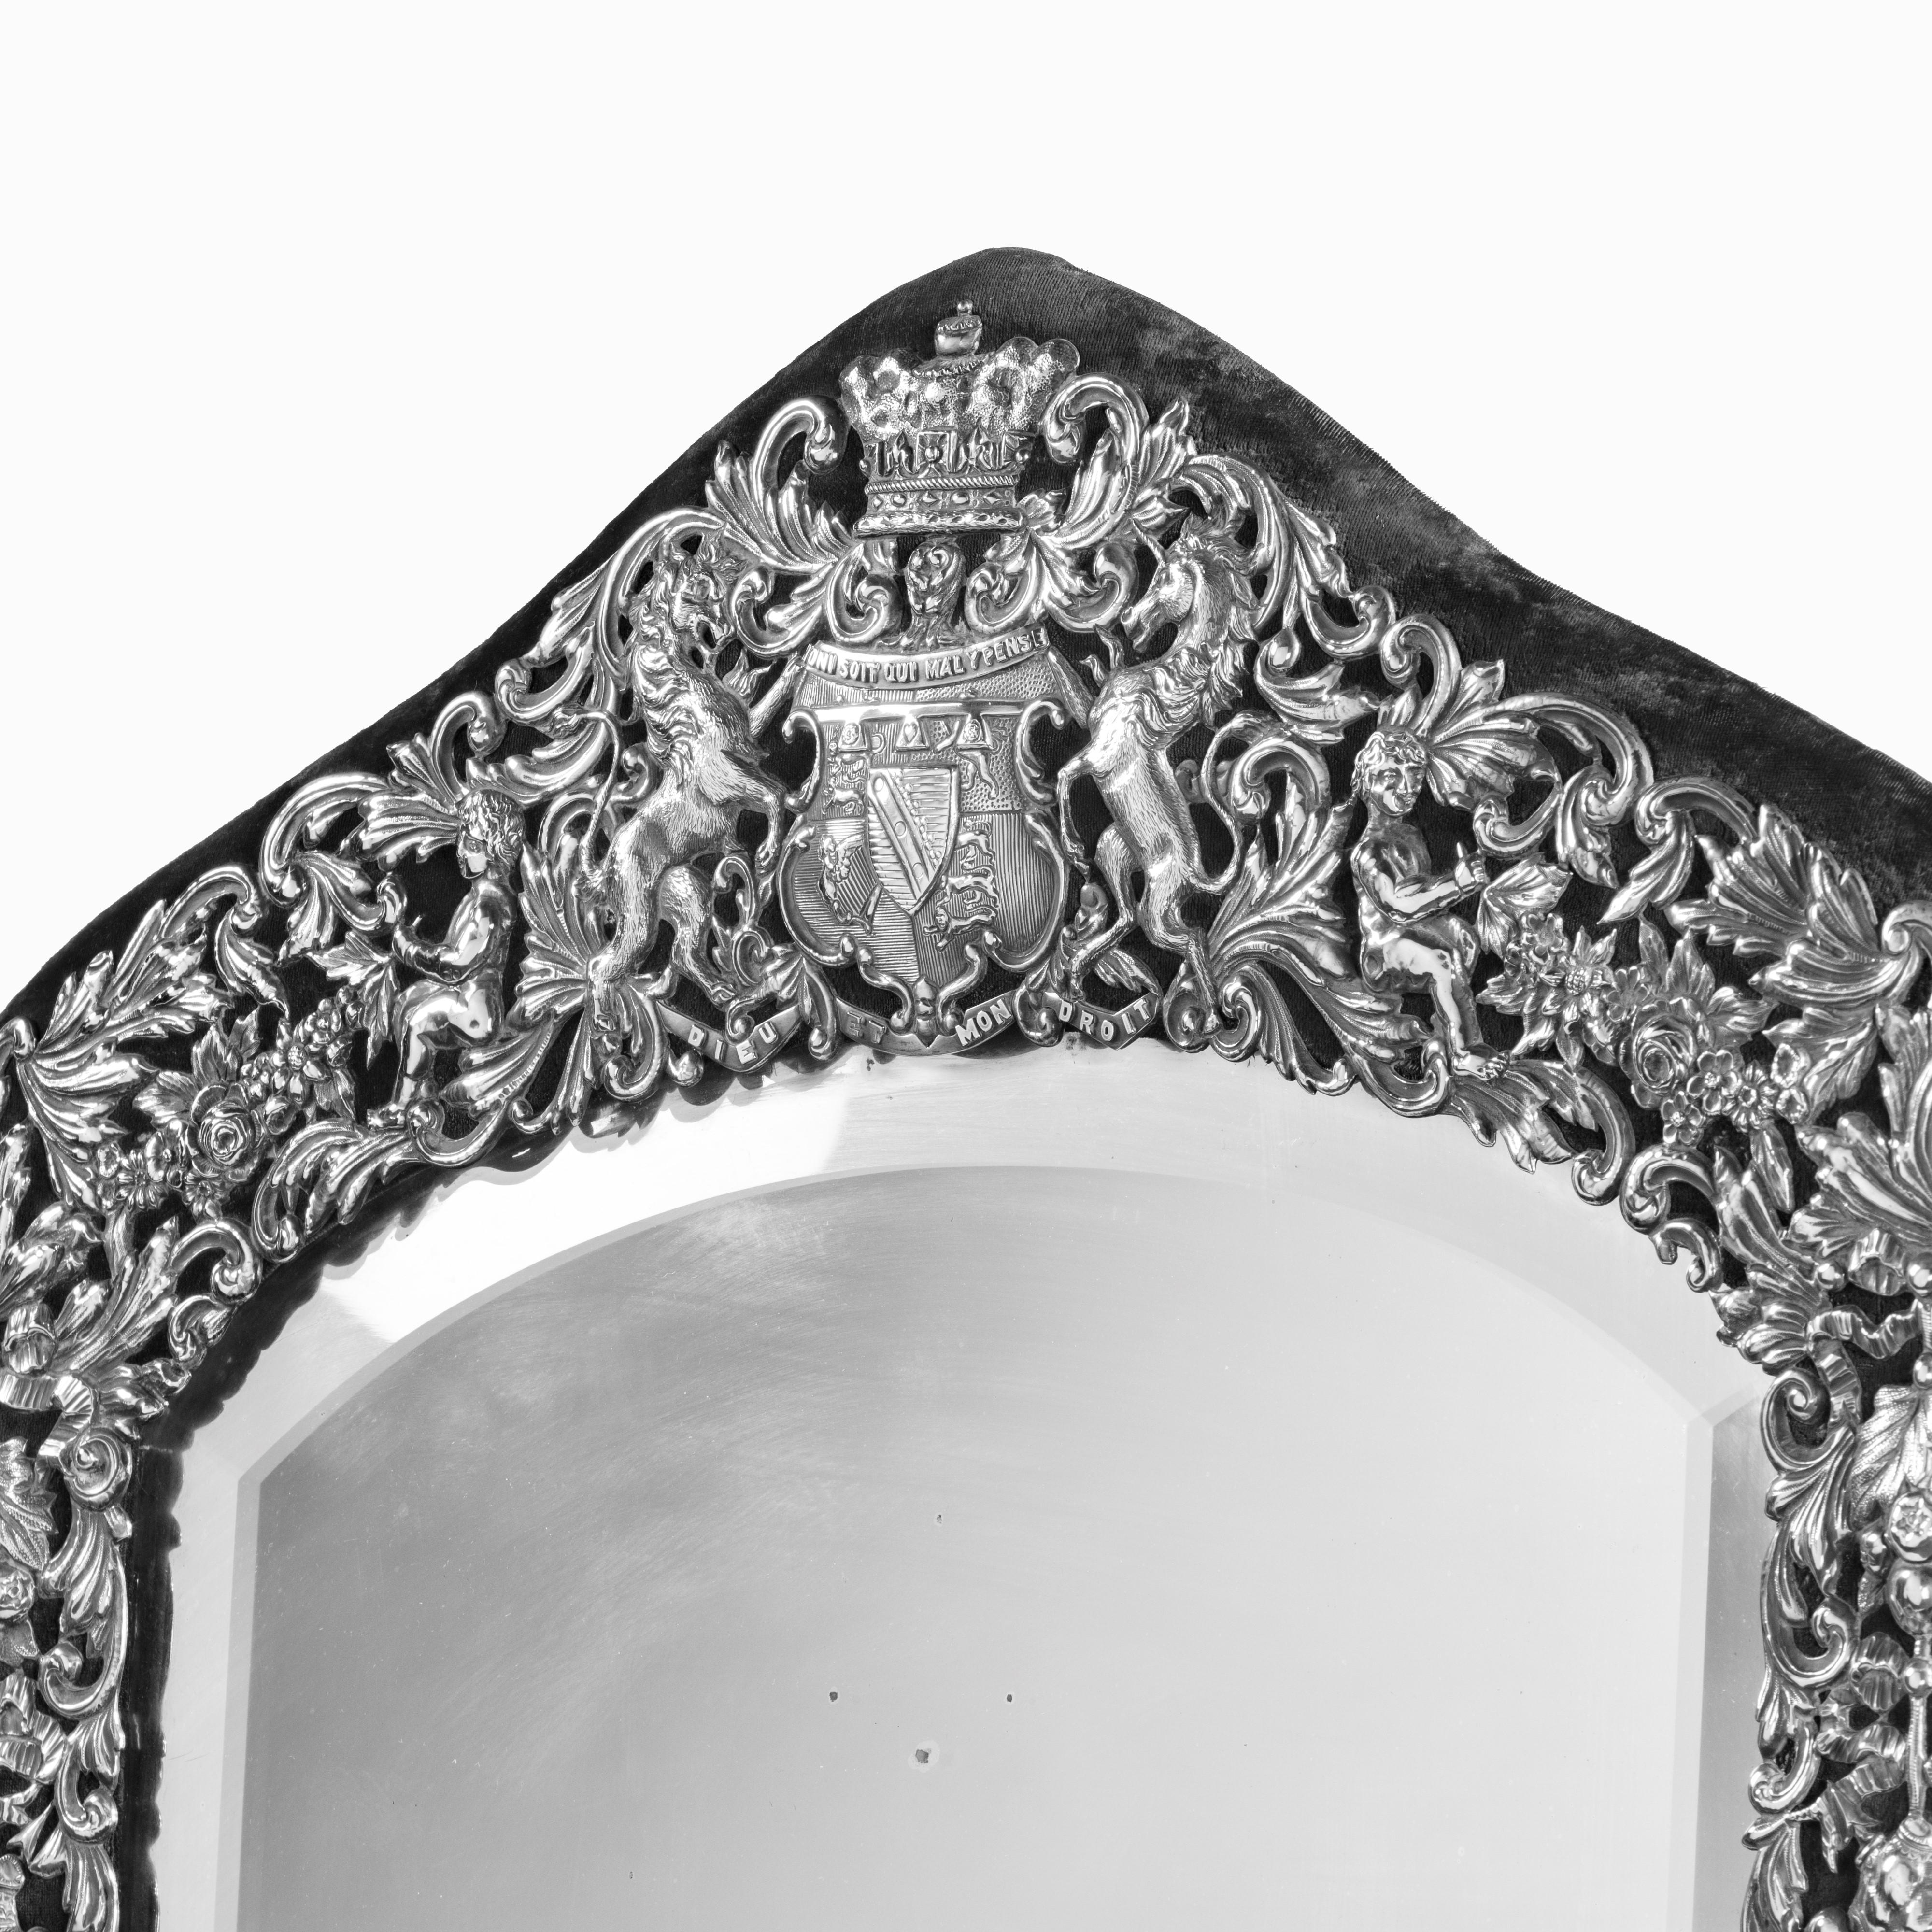 Large and Ornate Silver Table Mirror, a Royal Wedding Gift In Excellent Condition For Sale In Lymington, Hampshire